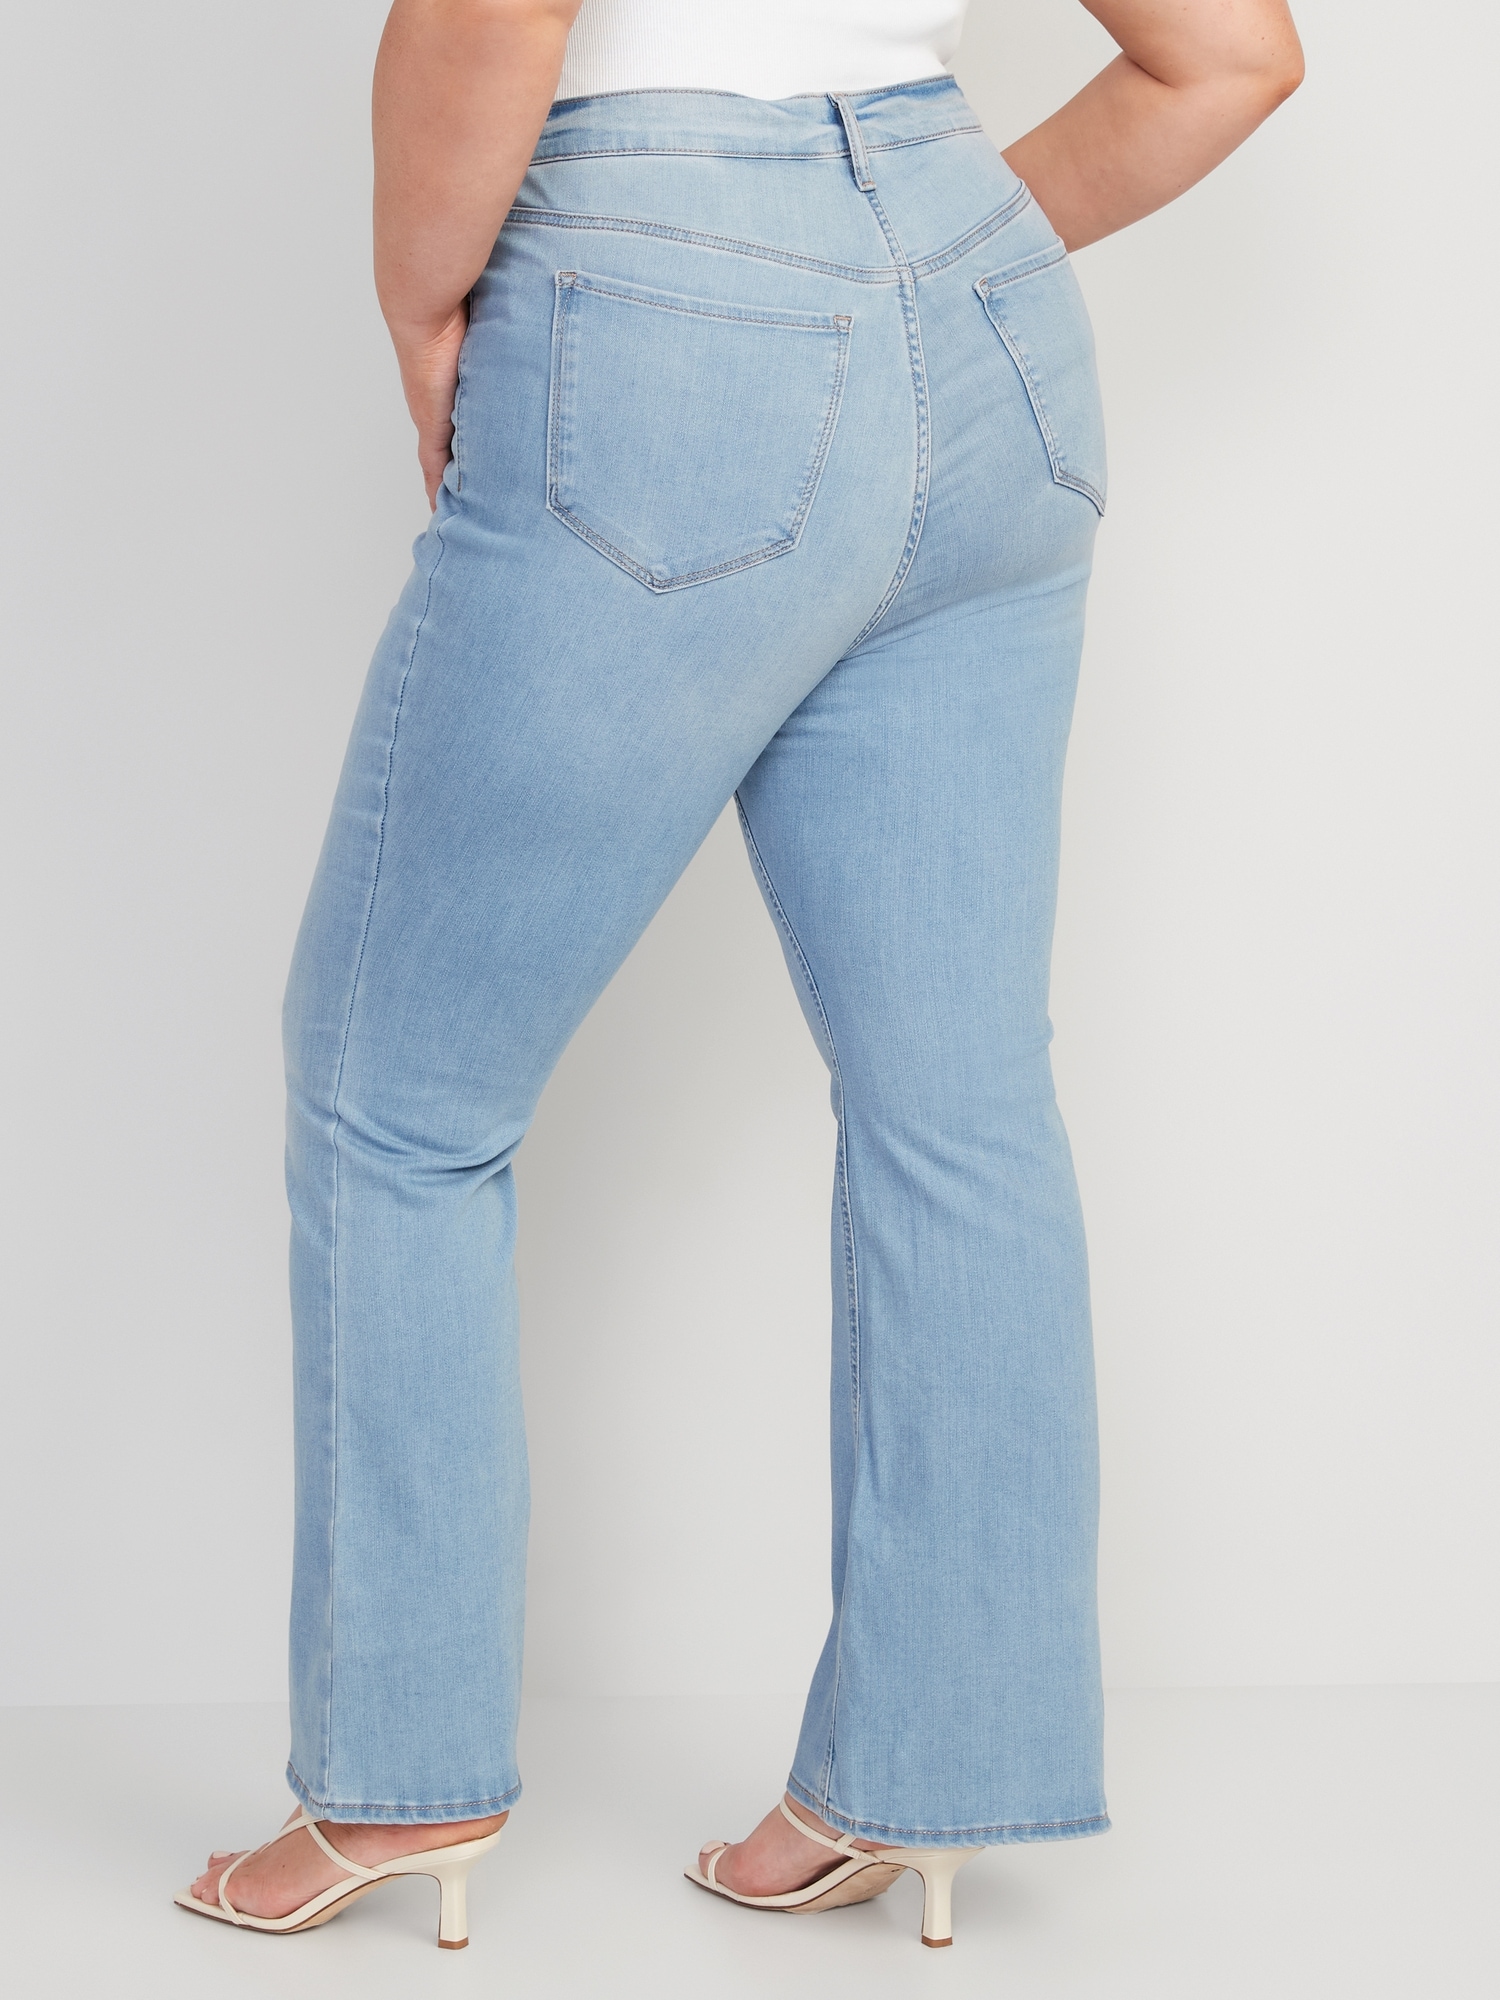 FitsYou 3-Sizes-In-One Extra High-Waisted Flare Jeans for Women | Old Navy